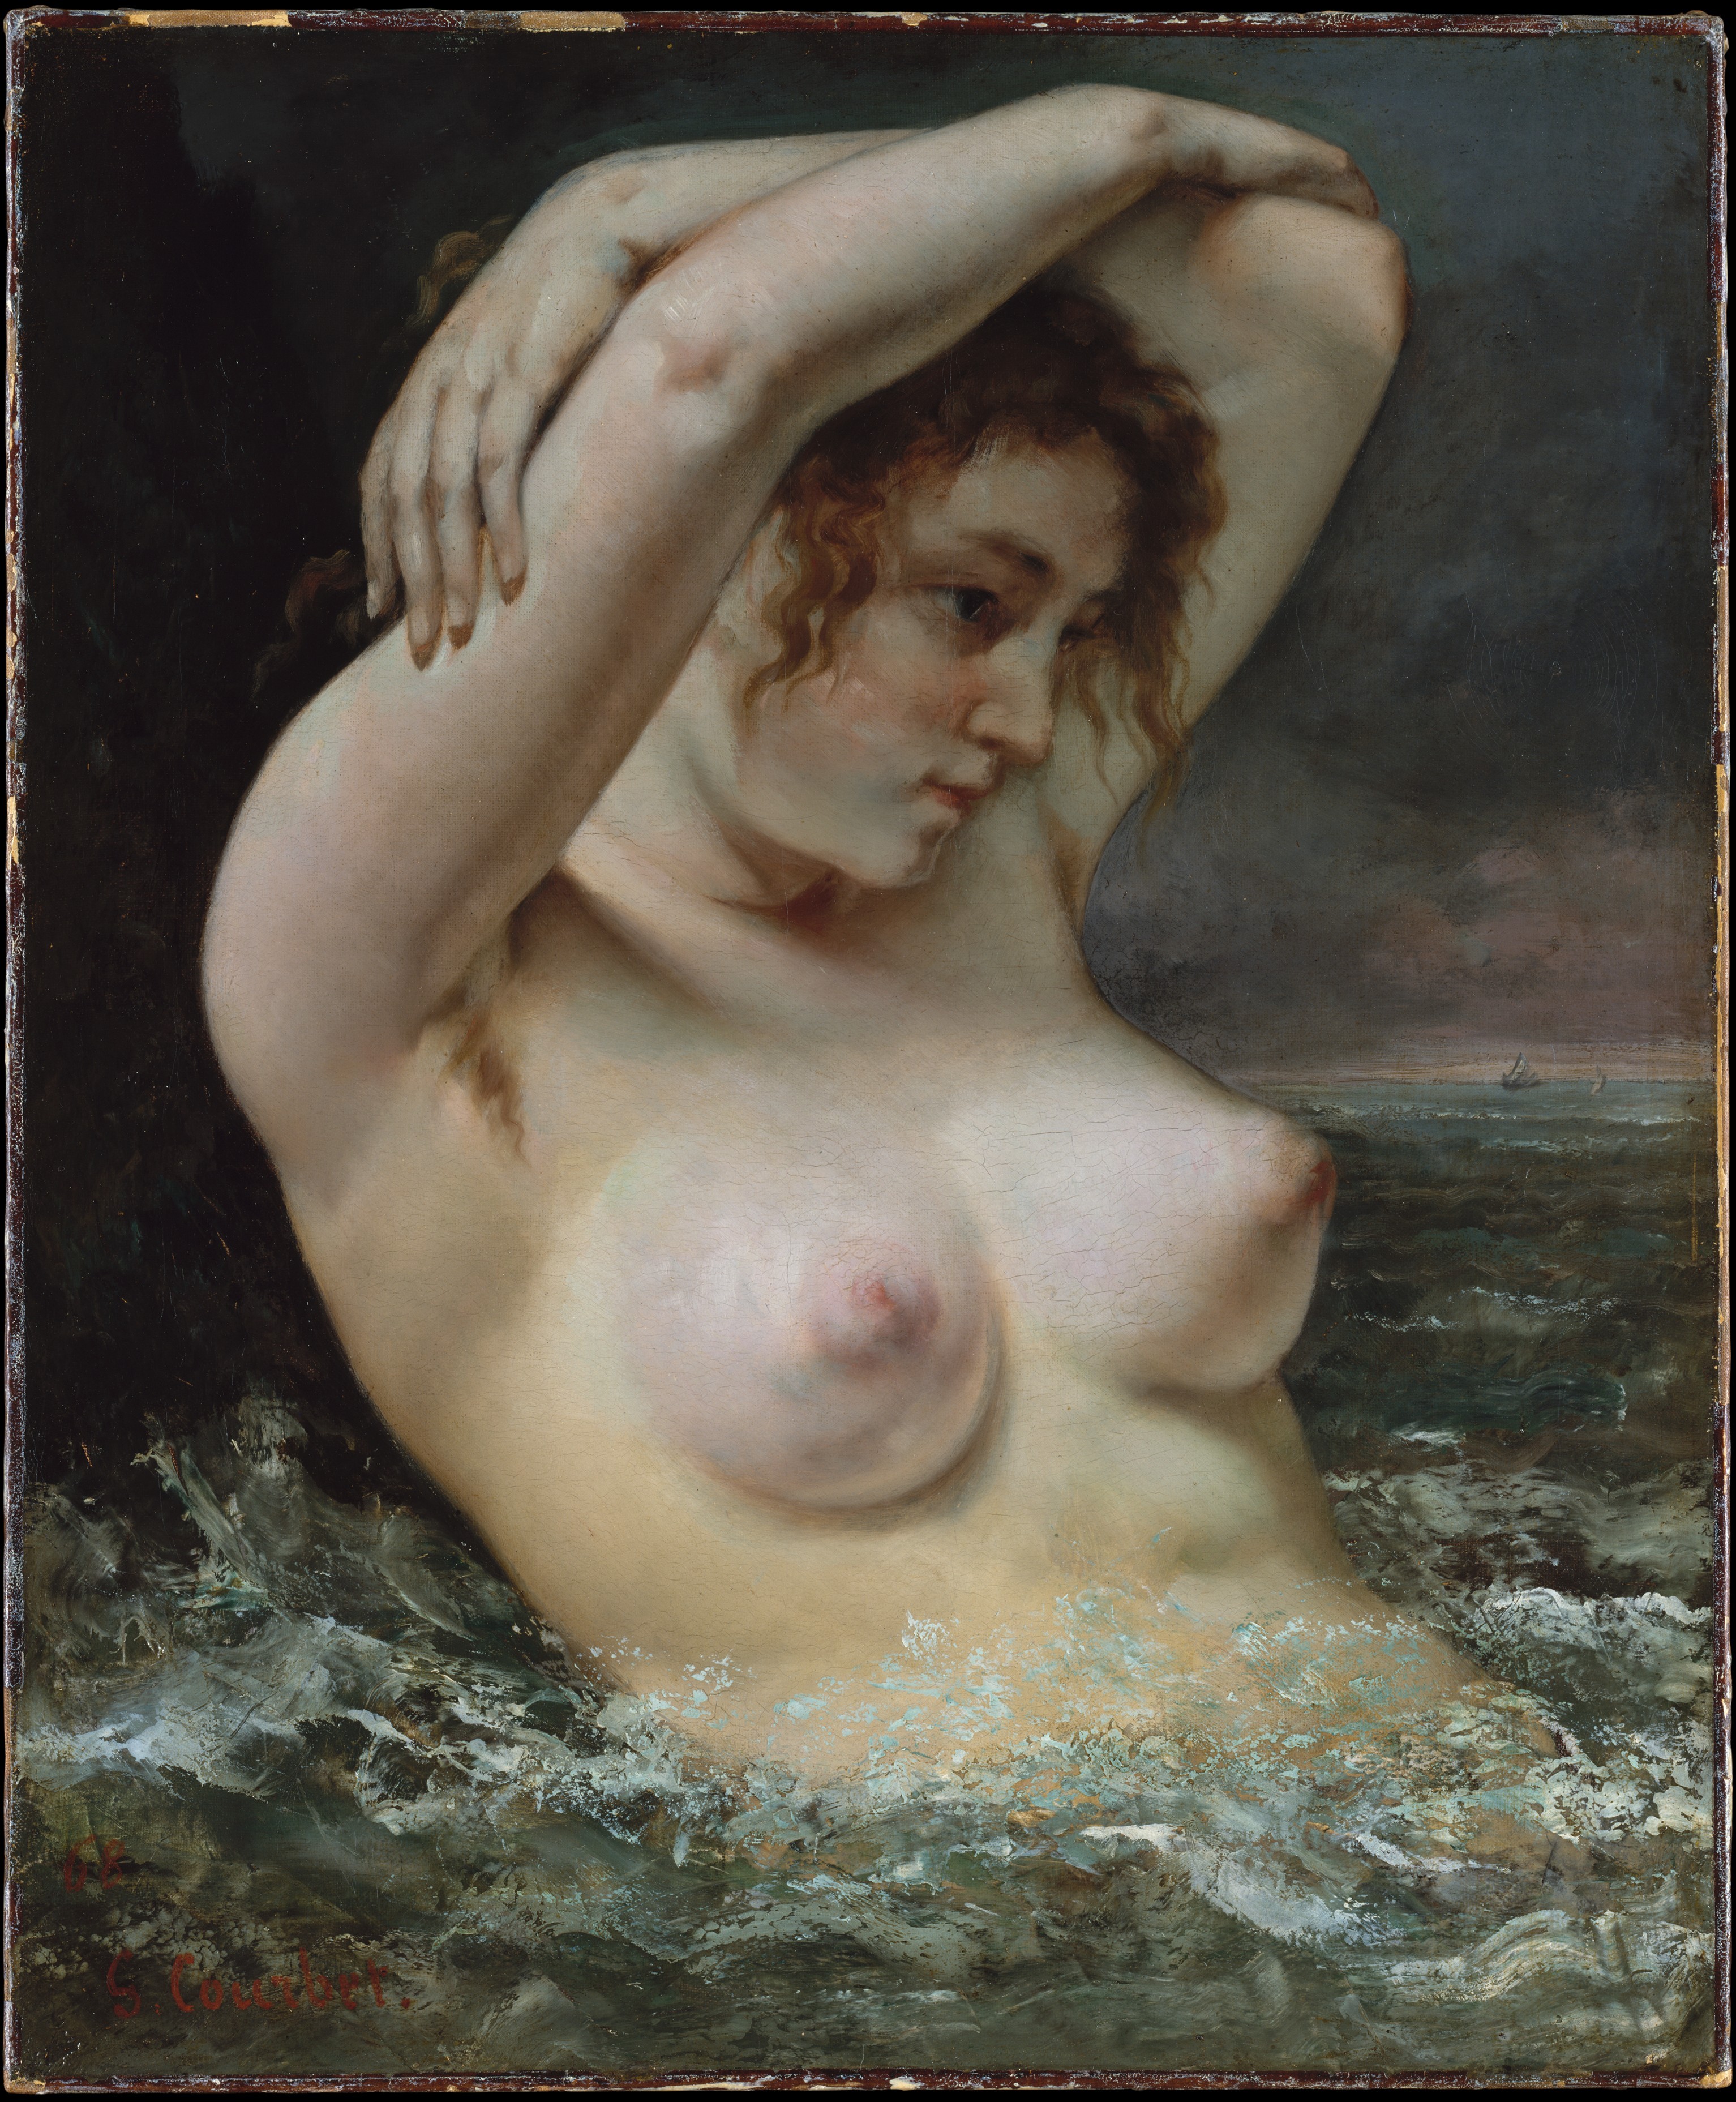 The Woman in the Waves by Gustave Courbet - 1868 - 65.4 x 54 cm Metropolitan Museum of Art